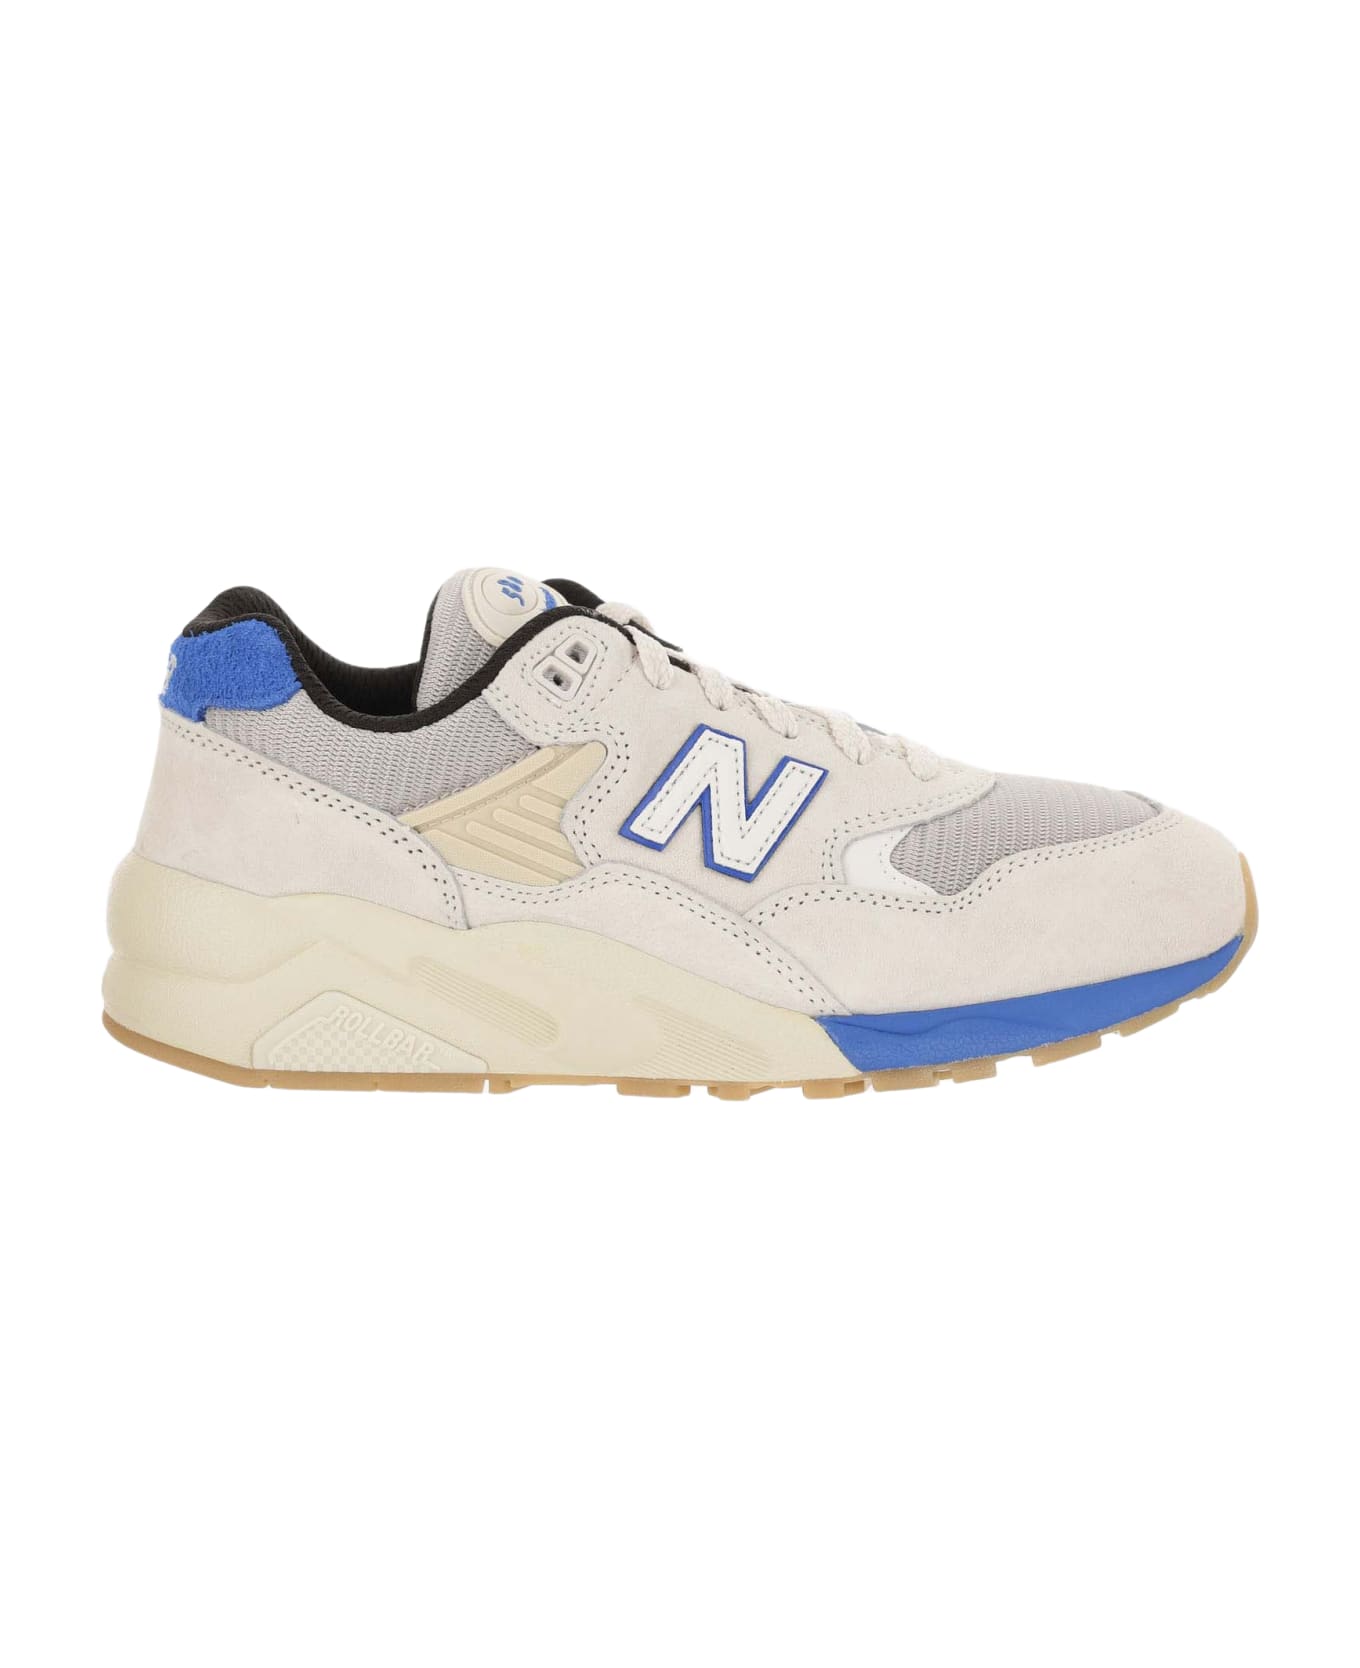 New Balance Sneakers 580 - White